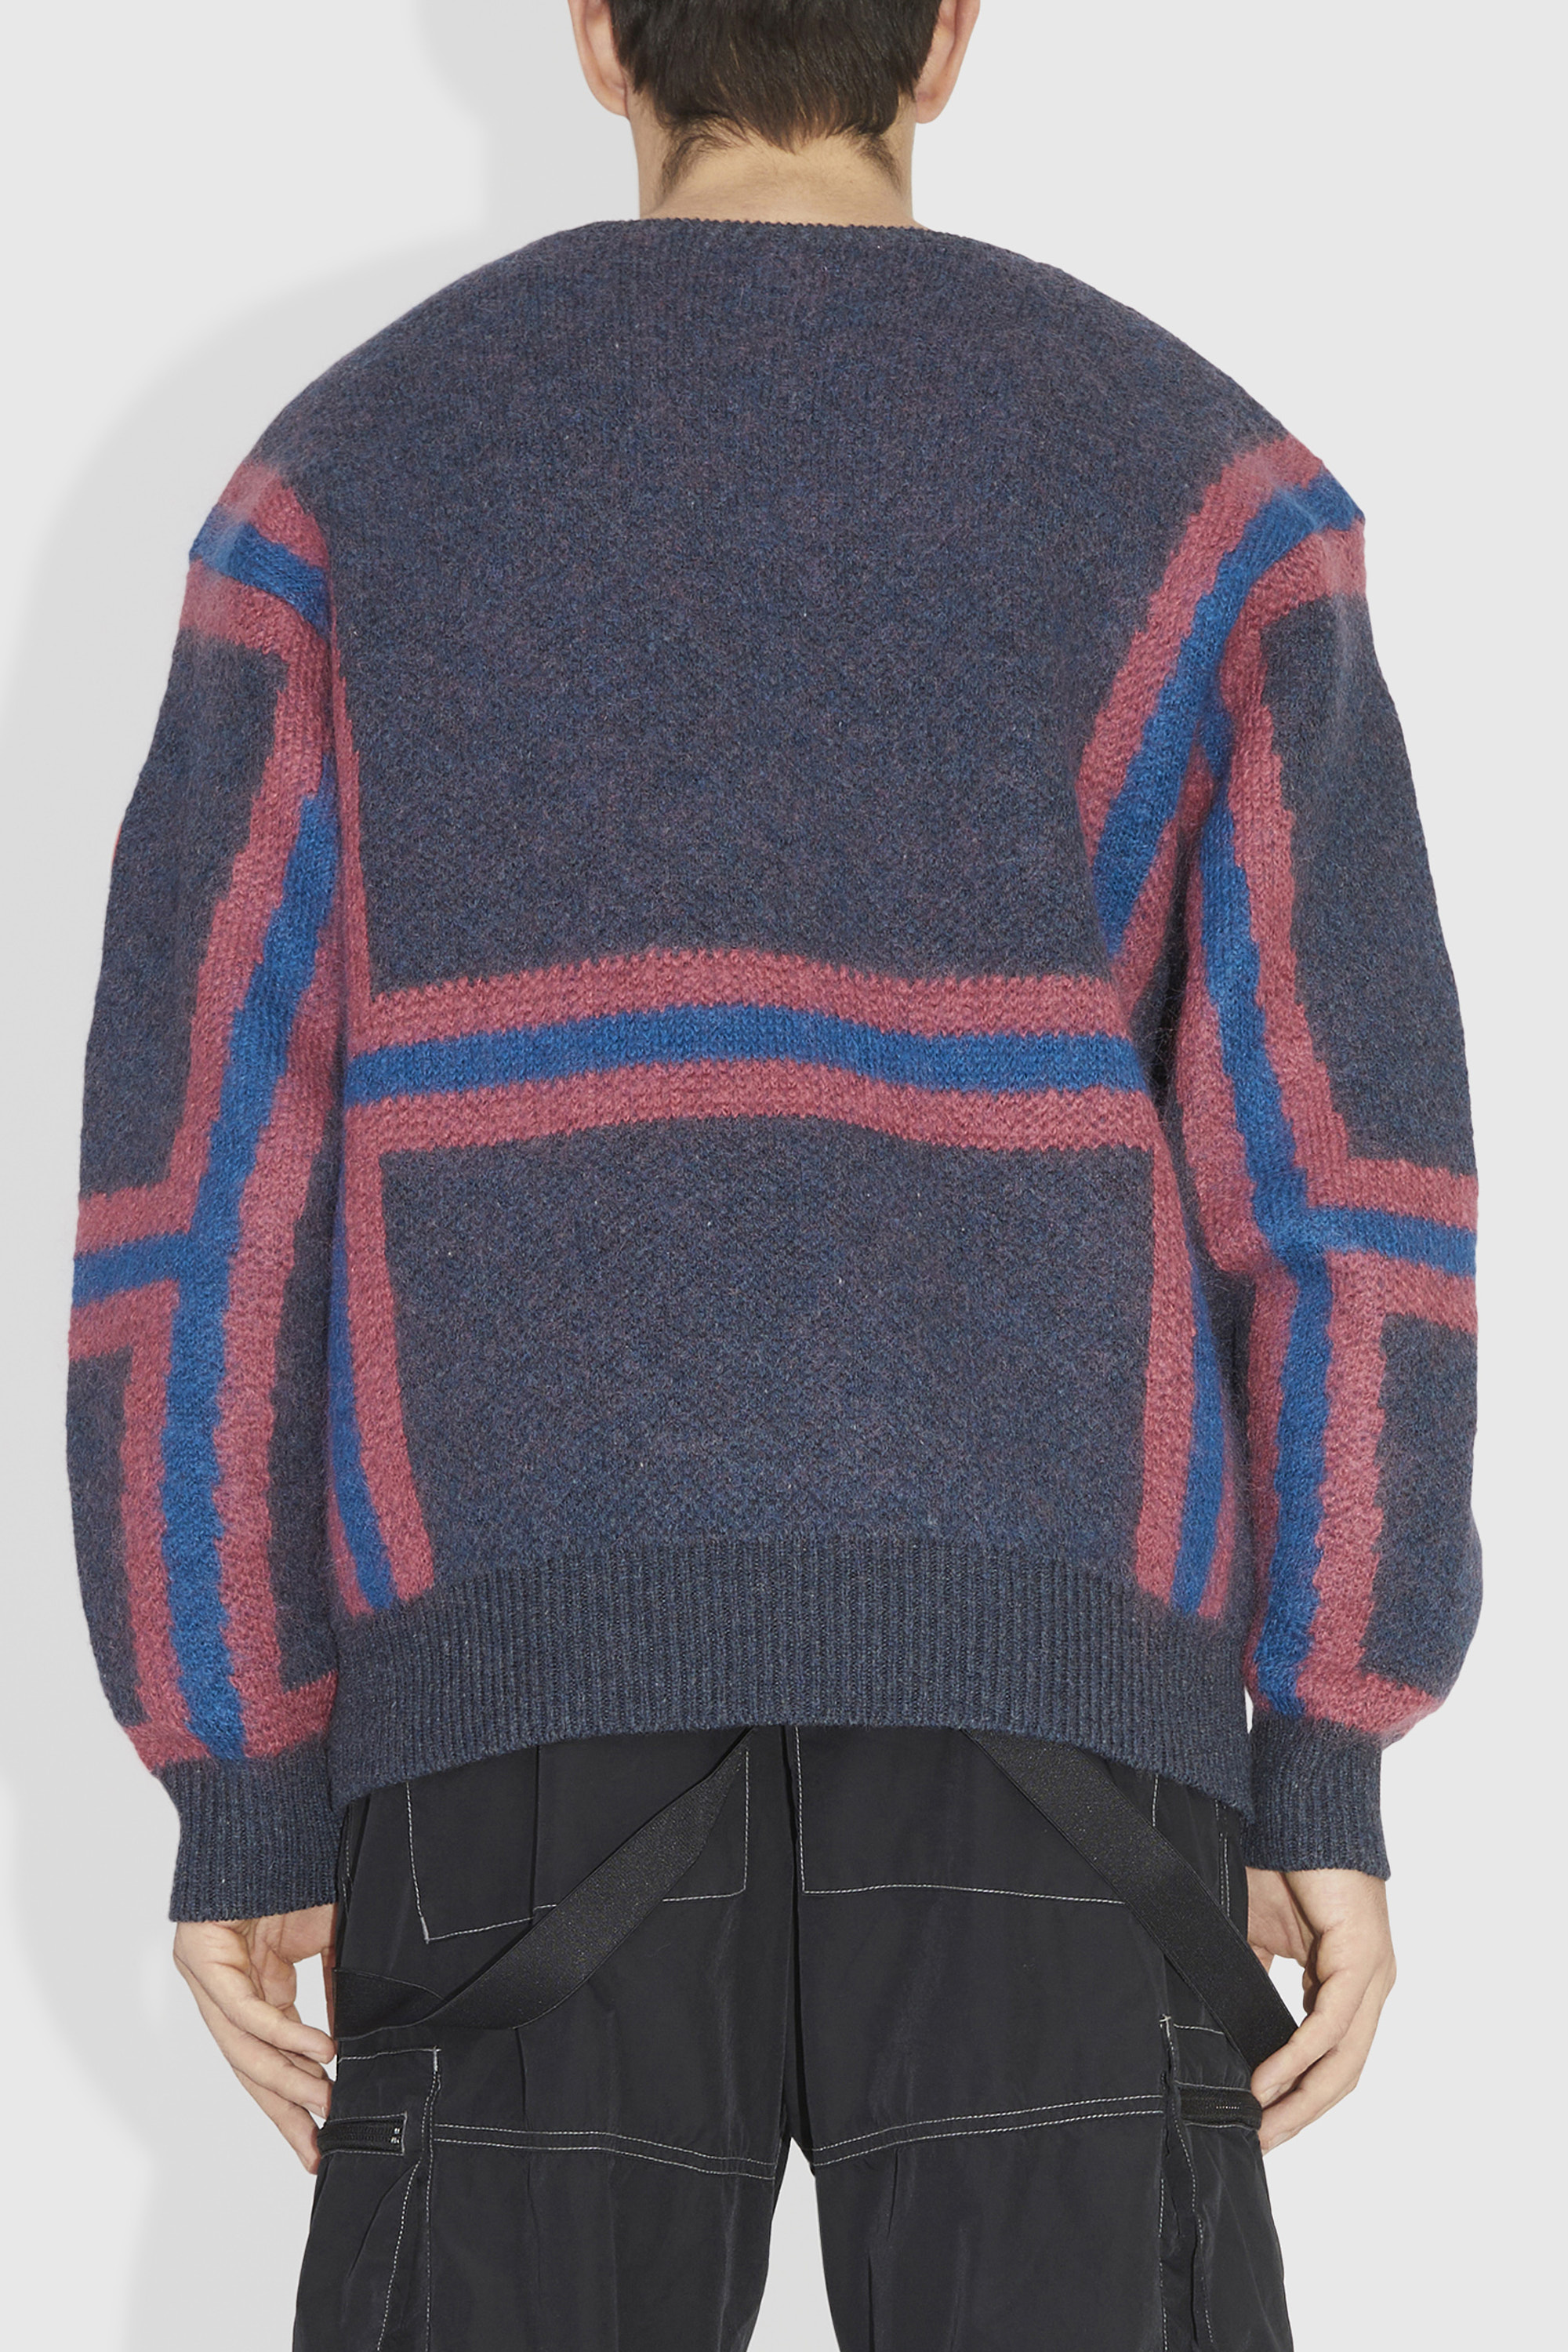 Cav Empt Indefinable Boundary Knit Navy | WoodWood.com